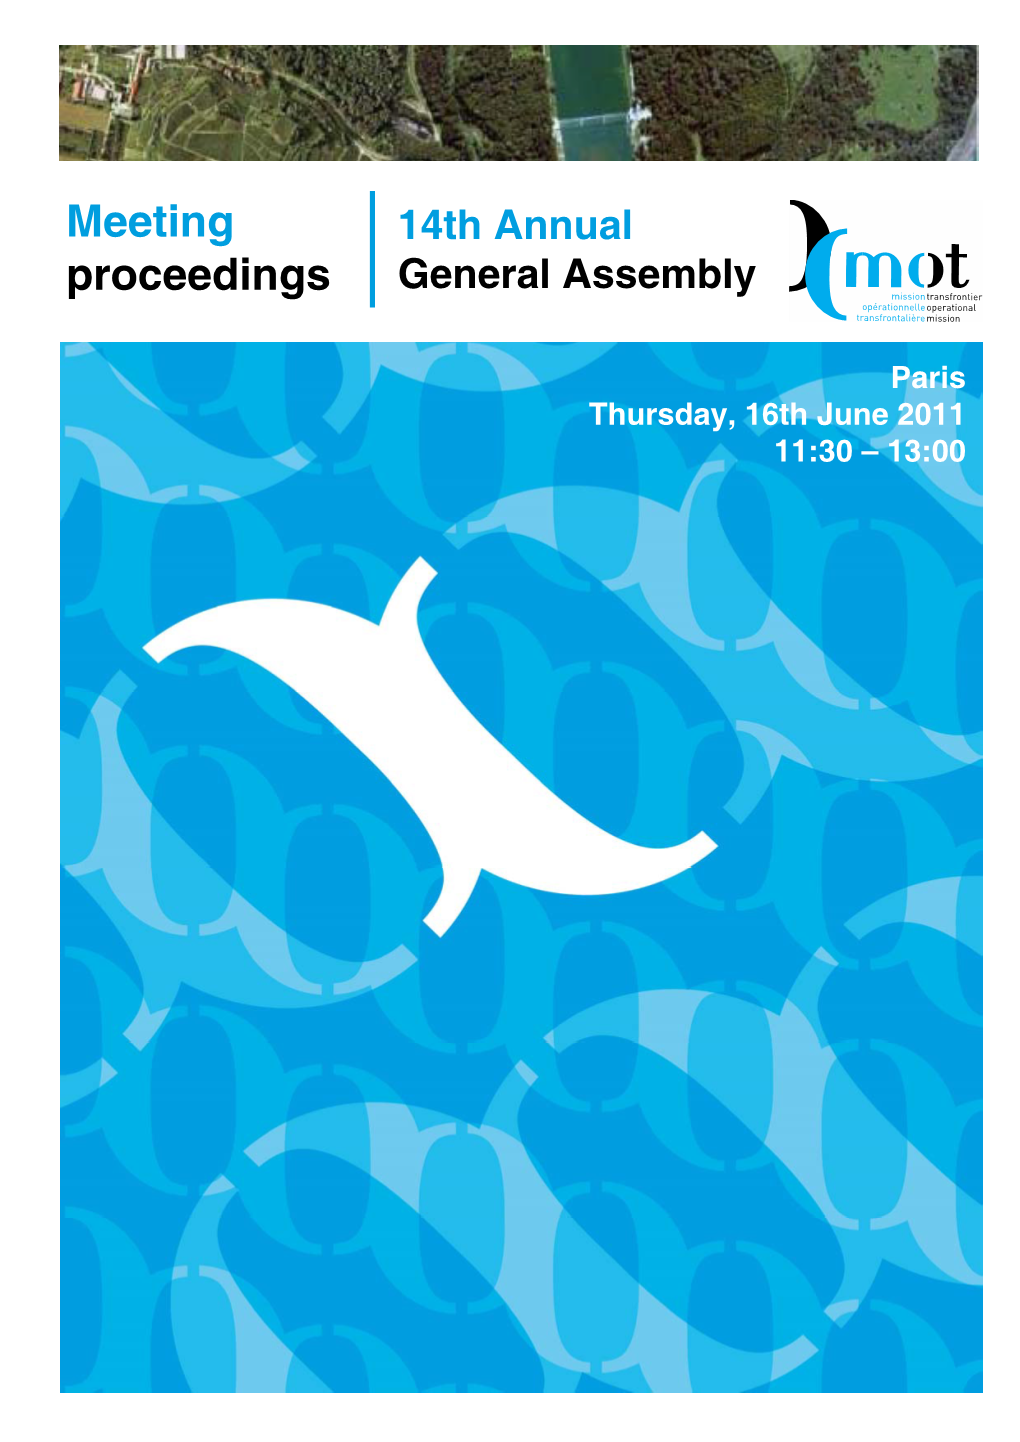 MEETING PROCEEDINGS of the ANNUAL GENERAL ASSEMBLY of MOT,16Th June 2011